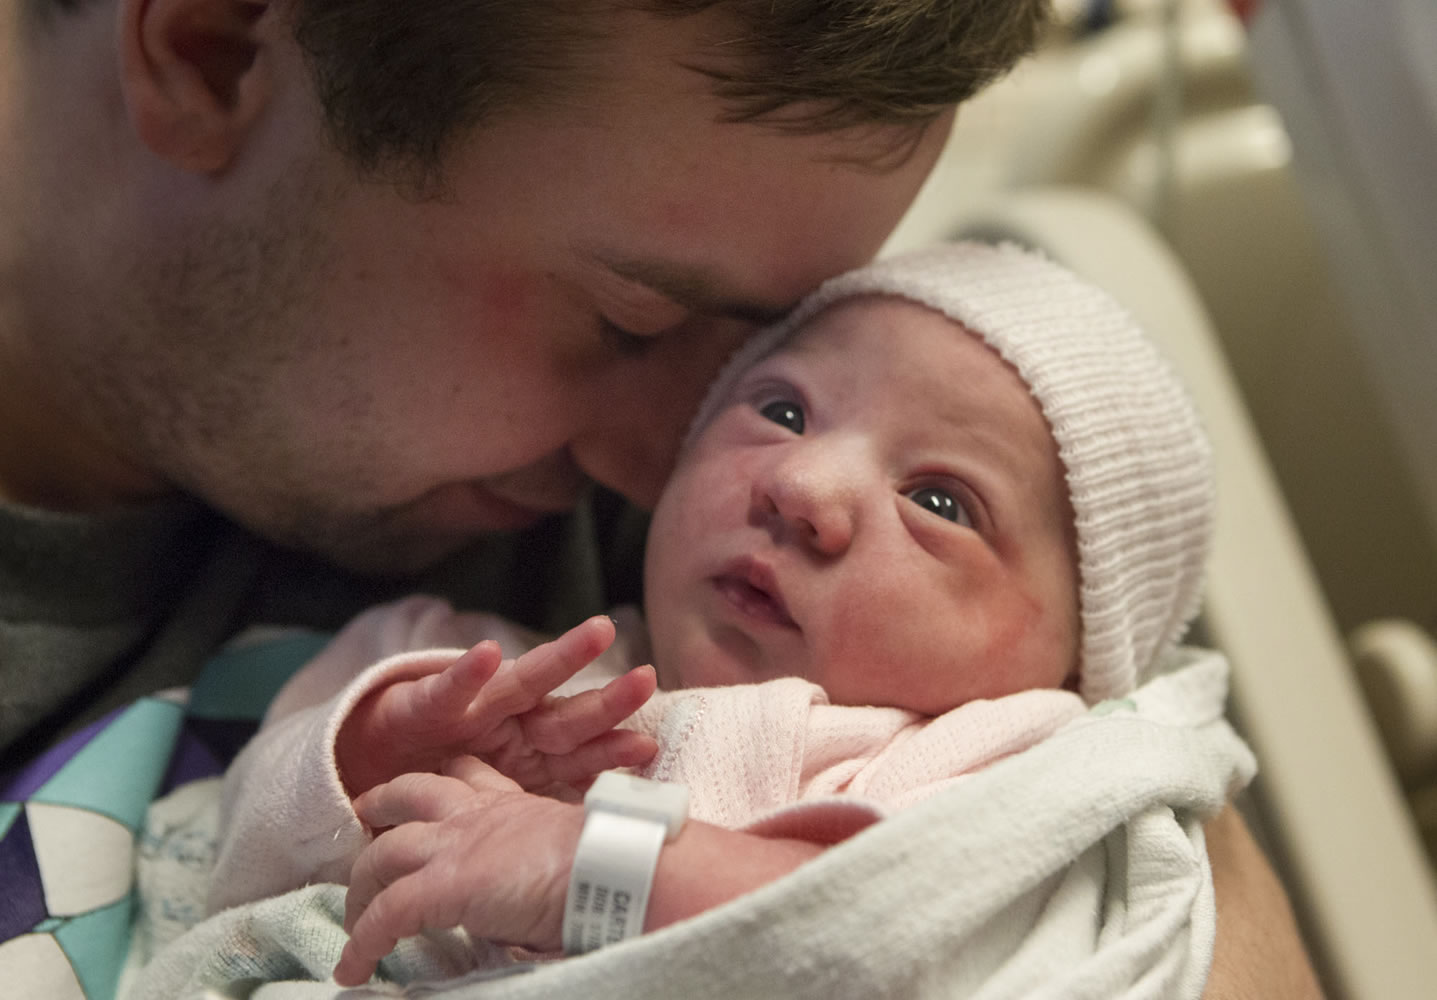 Aubrey Maya Schneider weighed 7 pounds, 6 ounces and was 20 inches long when she was born on New Year's Day.